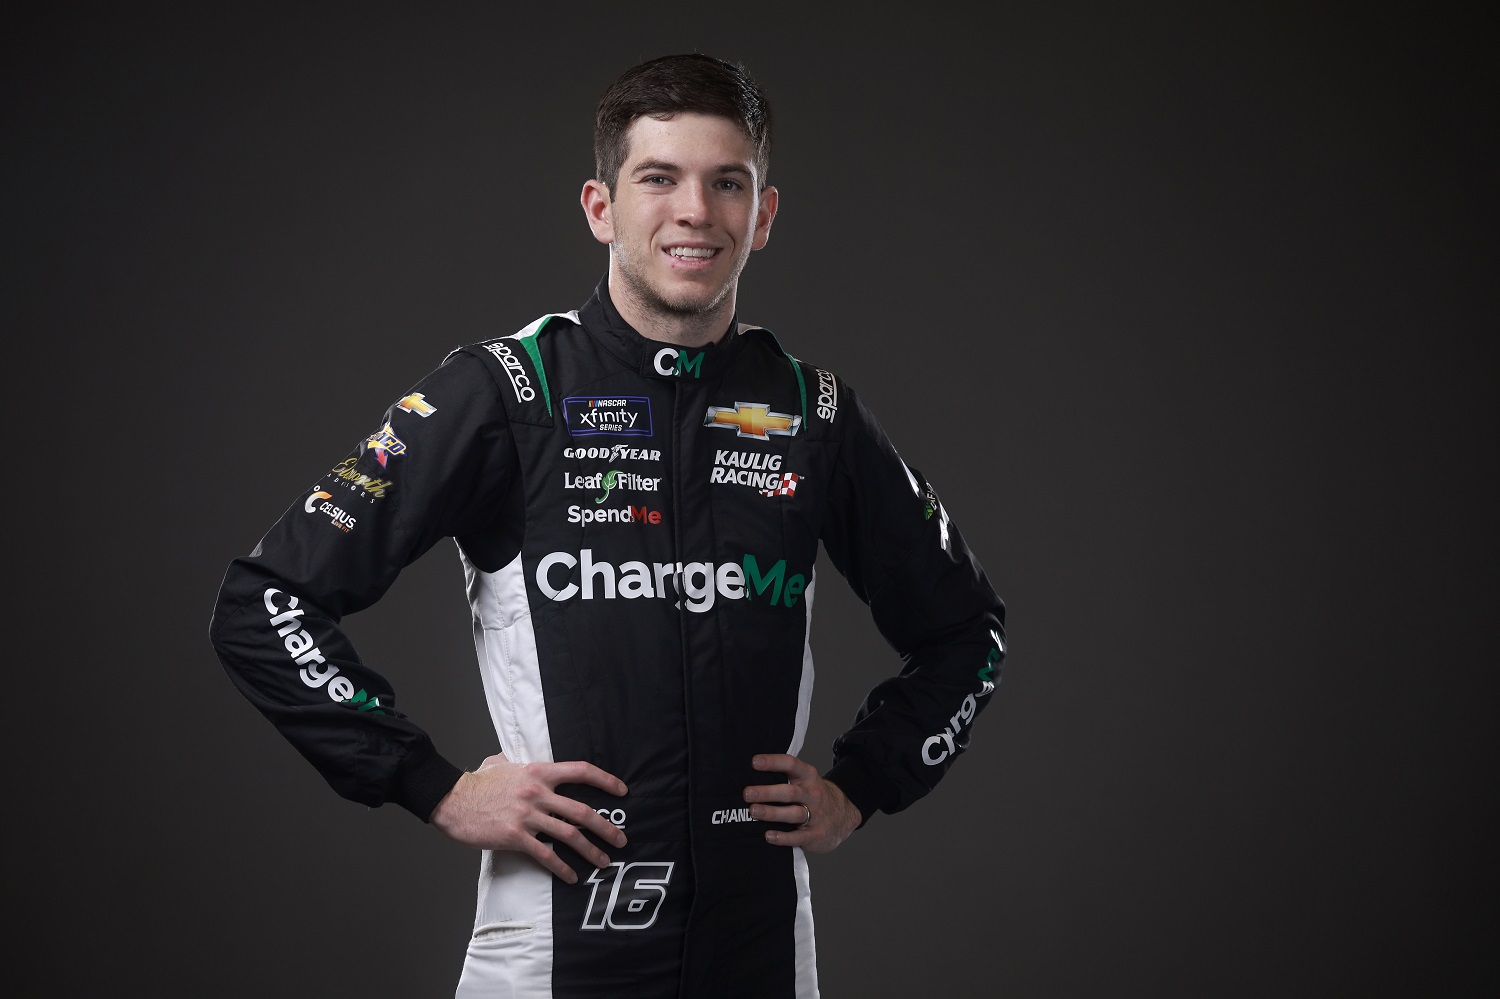 NASCAR driver Chandler Smith poses for a photo during NASCAR Production Days at Charlotte Convention Center on Jan. 18, 2023.